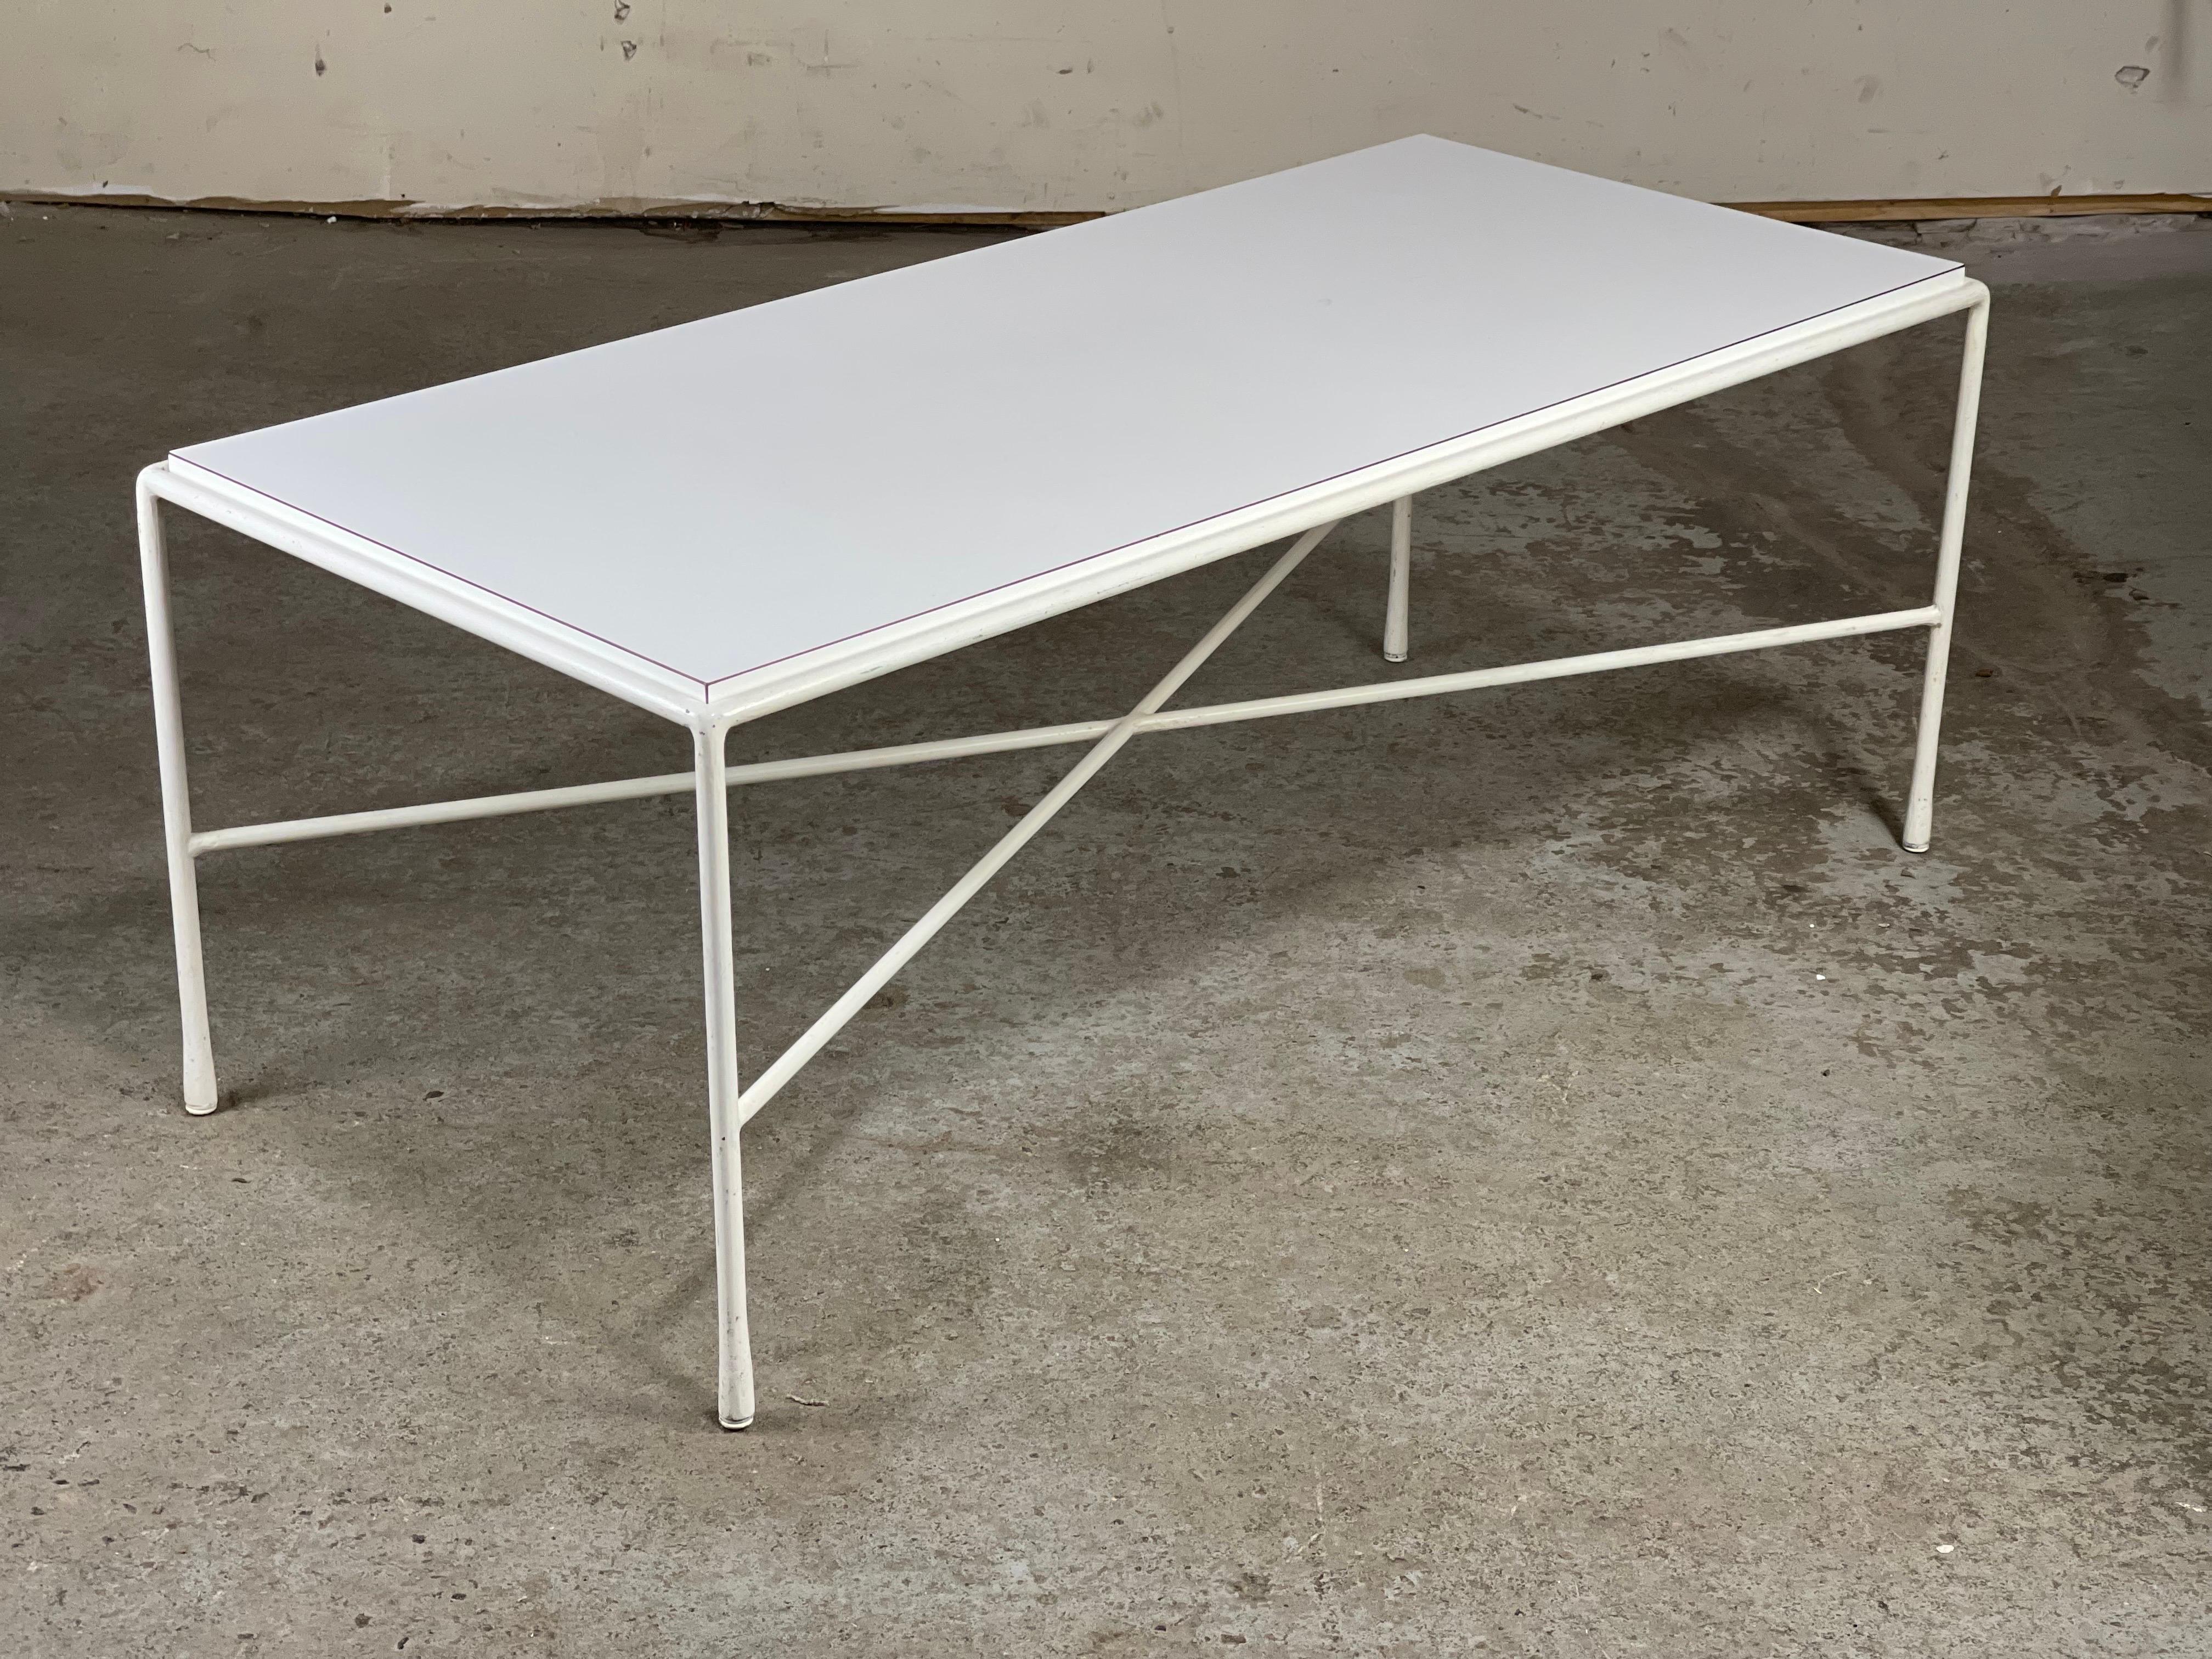 Rare Coffee Table or Bench by Darrell Landrum for Avard In Good Condition For Sale In Framingham, MA